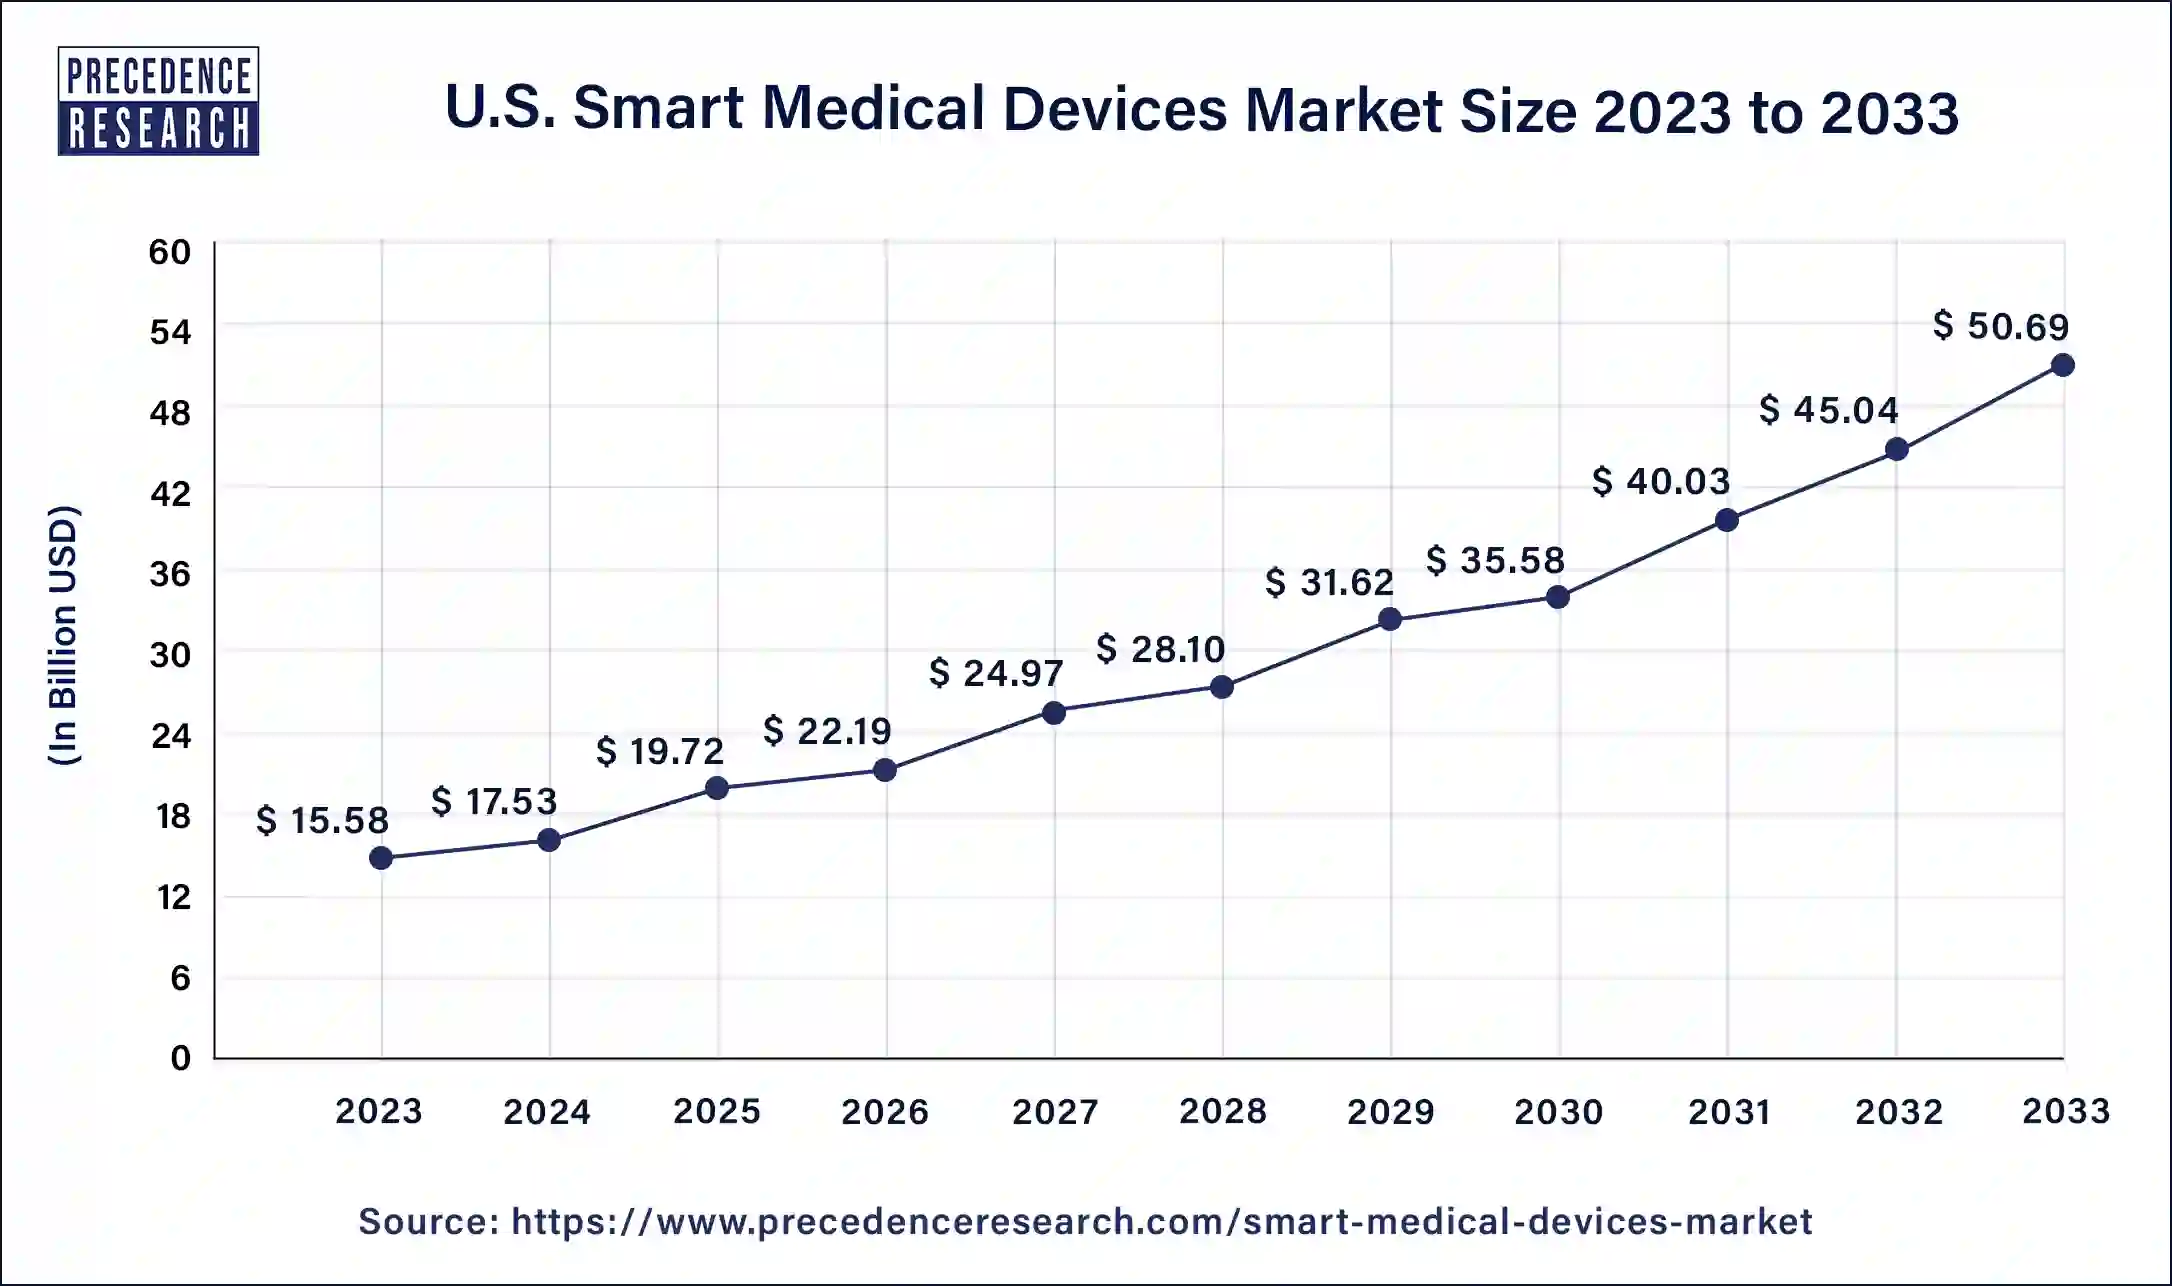 U.S. Smart Medical Devices Market Size 2024 to 2033